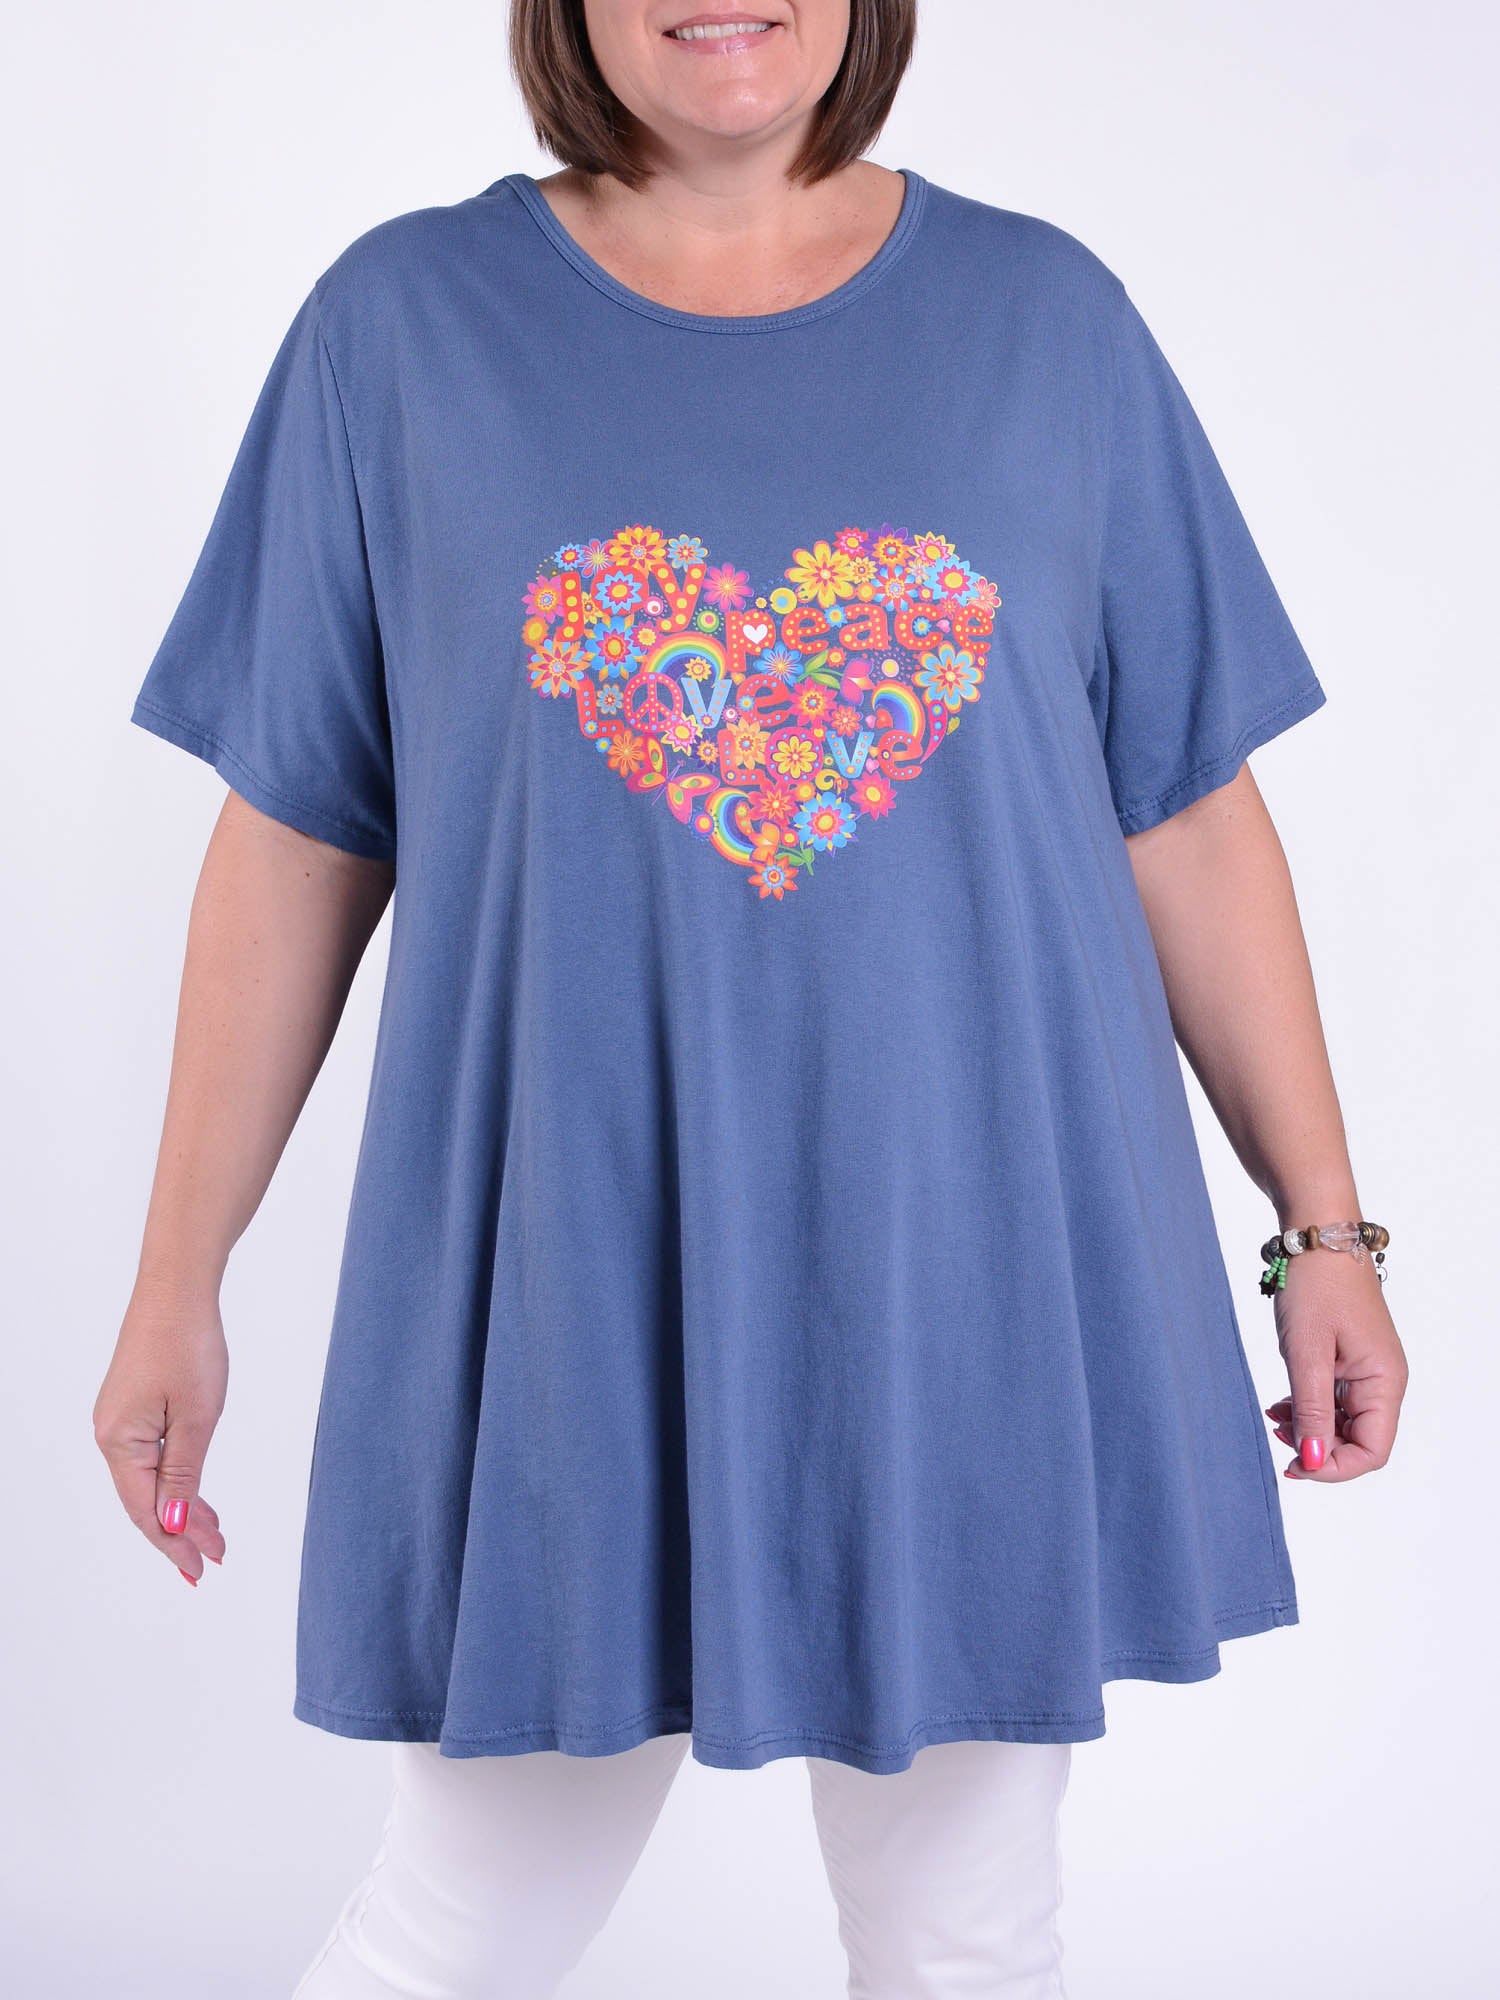 Basic Cotton Swing T Shirt - Round Neck 10516 PEACE AND LOVE, Tops & Shirts, Pure Plus Clothing, Lagenlook Clothing, Plus Size Fashion, Over 50 Fashion